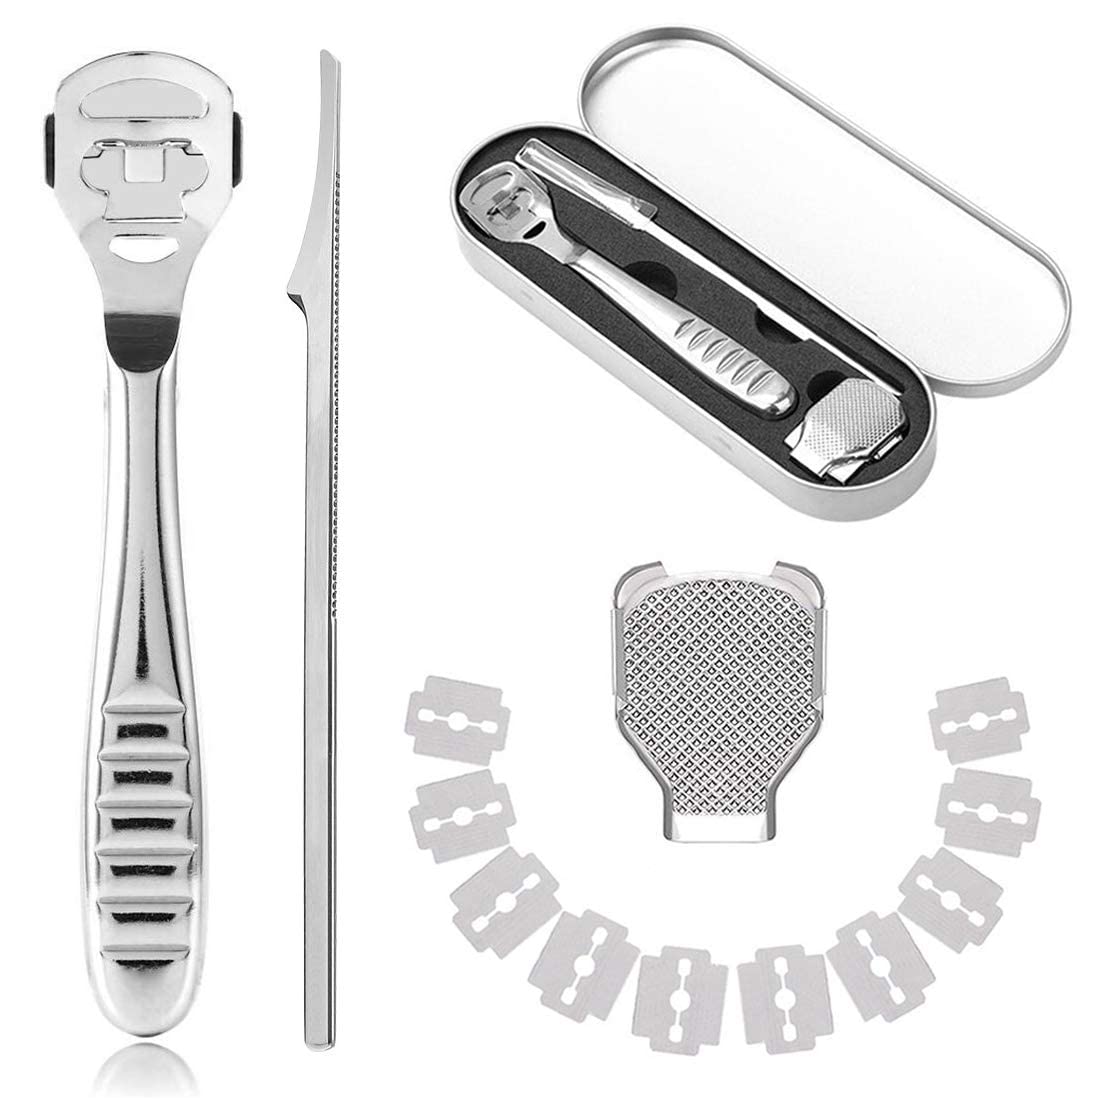 Foot File Set, Stainless Steel Foot Scraper Callus Remover Callus Shaver Sets Hard Skin Remover Foot Rasp Pedicure Kit Foot Care Tools for Dry Wet Foot Heel Callus, Dead, Cracked Skin, Sliver